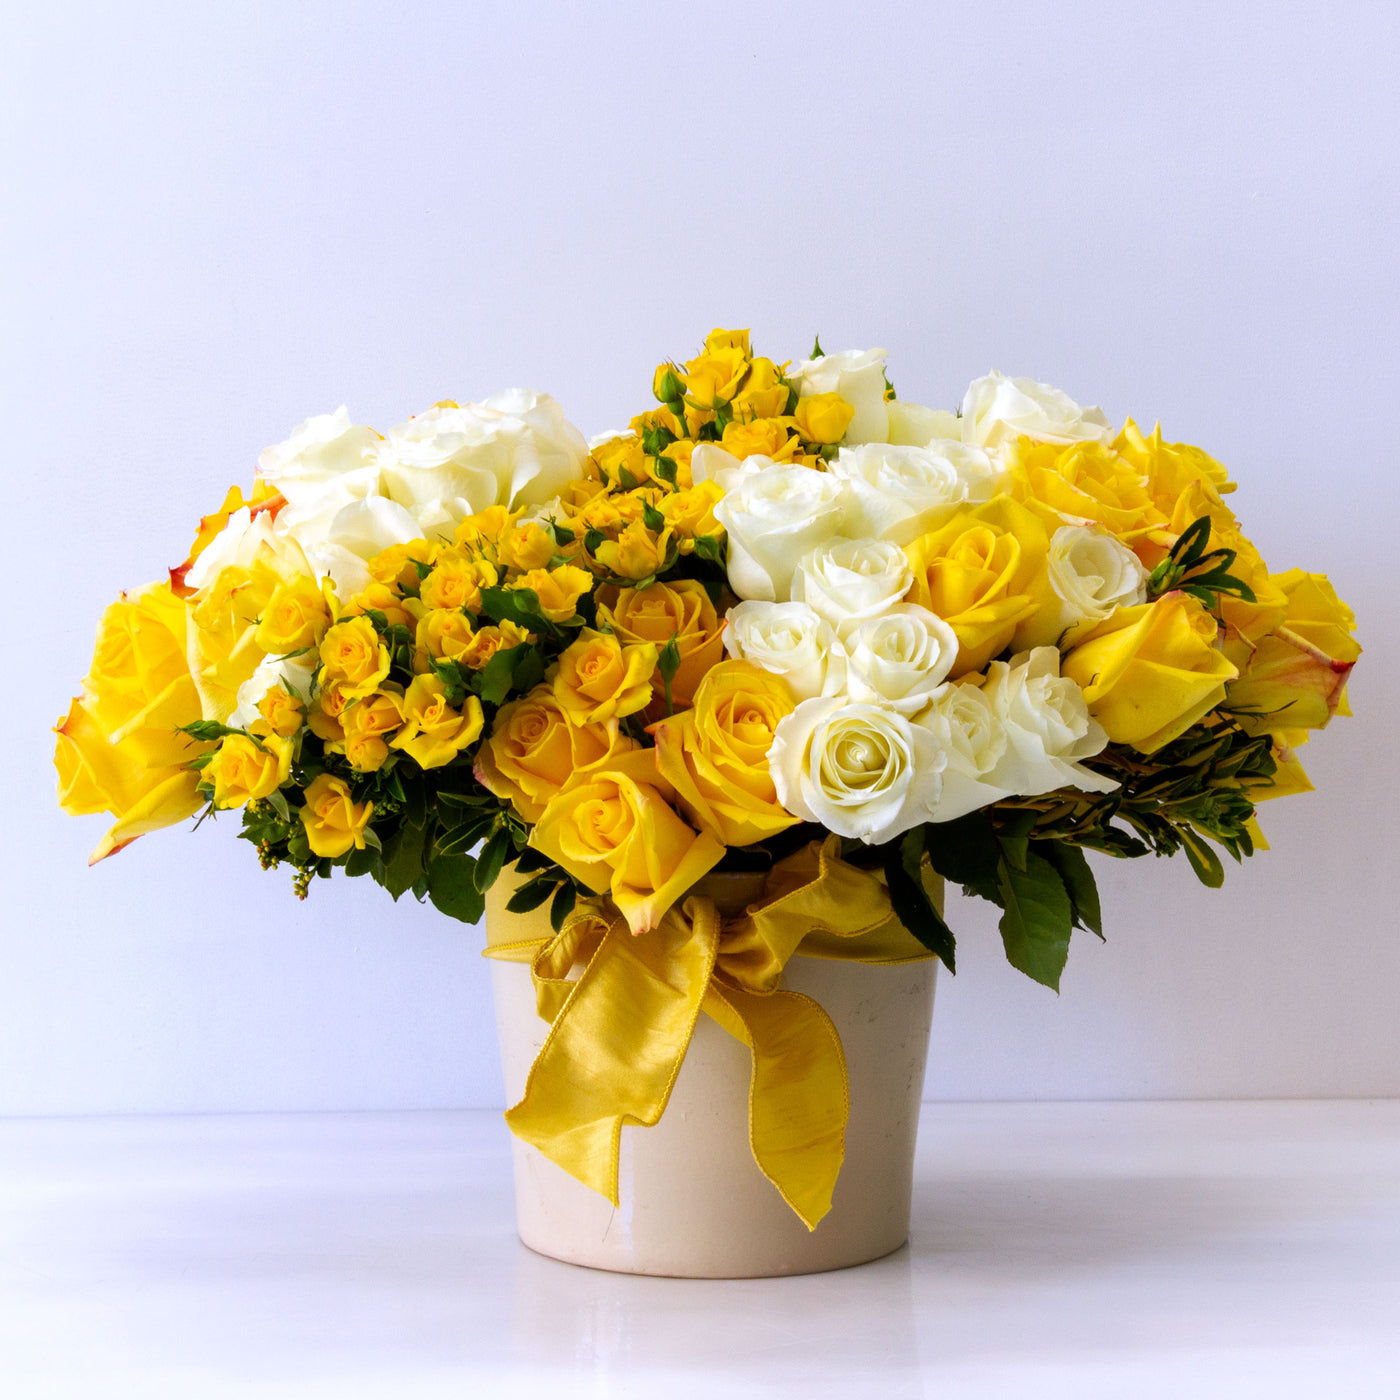 Our team at Beverly Hills Florist presents over 75 Ecuadorian Roses and locally grown spray Roses in a Ceramic Vase for same day delivery! Our Ms.Clueless is available for same day delivery! A bright and cheerful floral piece made for Birthdays, Thank you, Thinking of you and more !